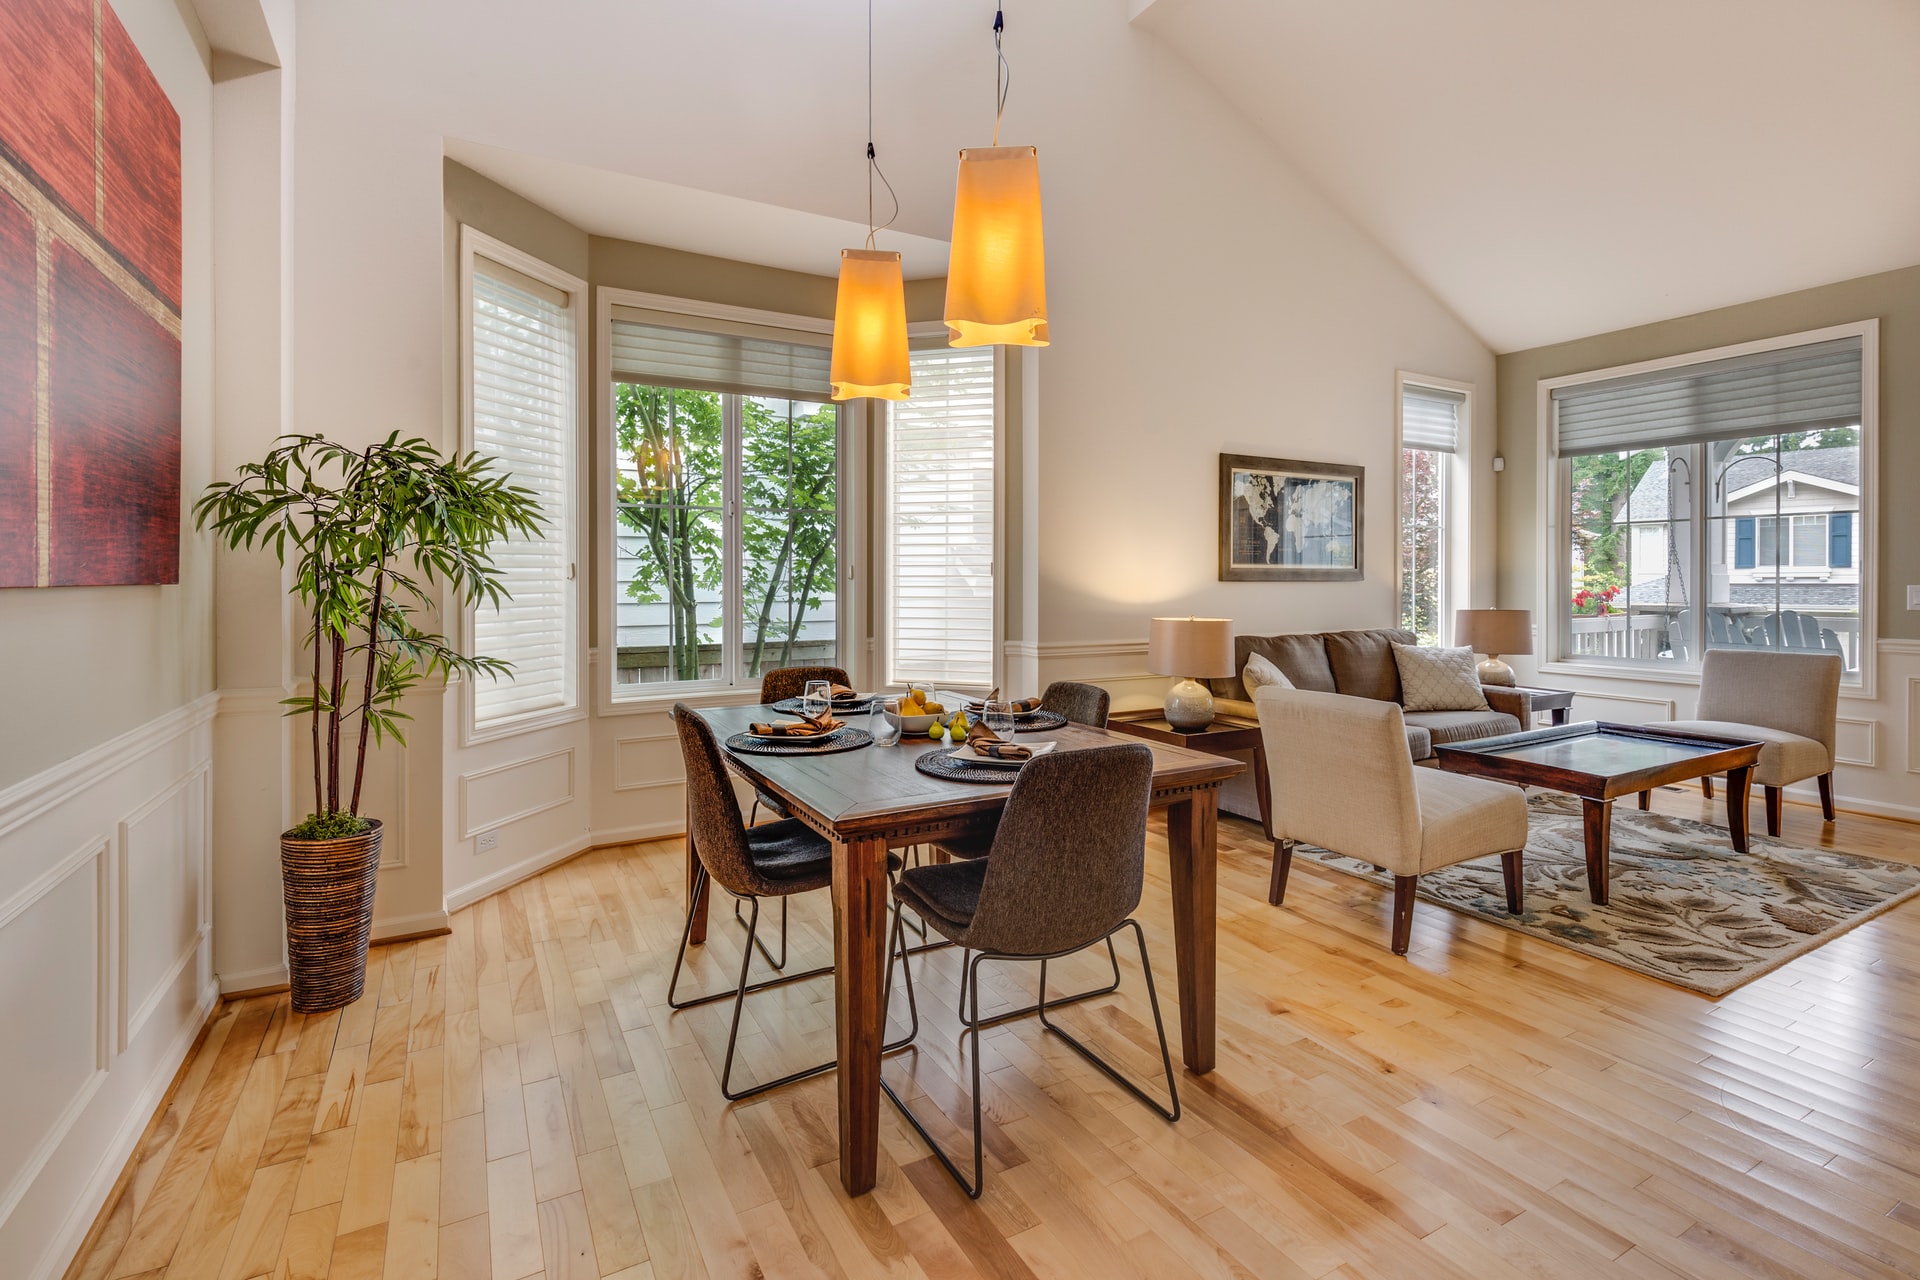 A dining area with hardwood floors